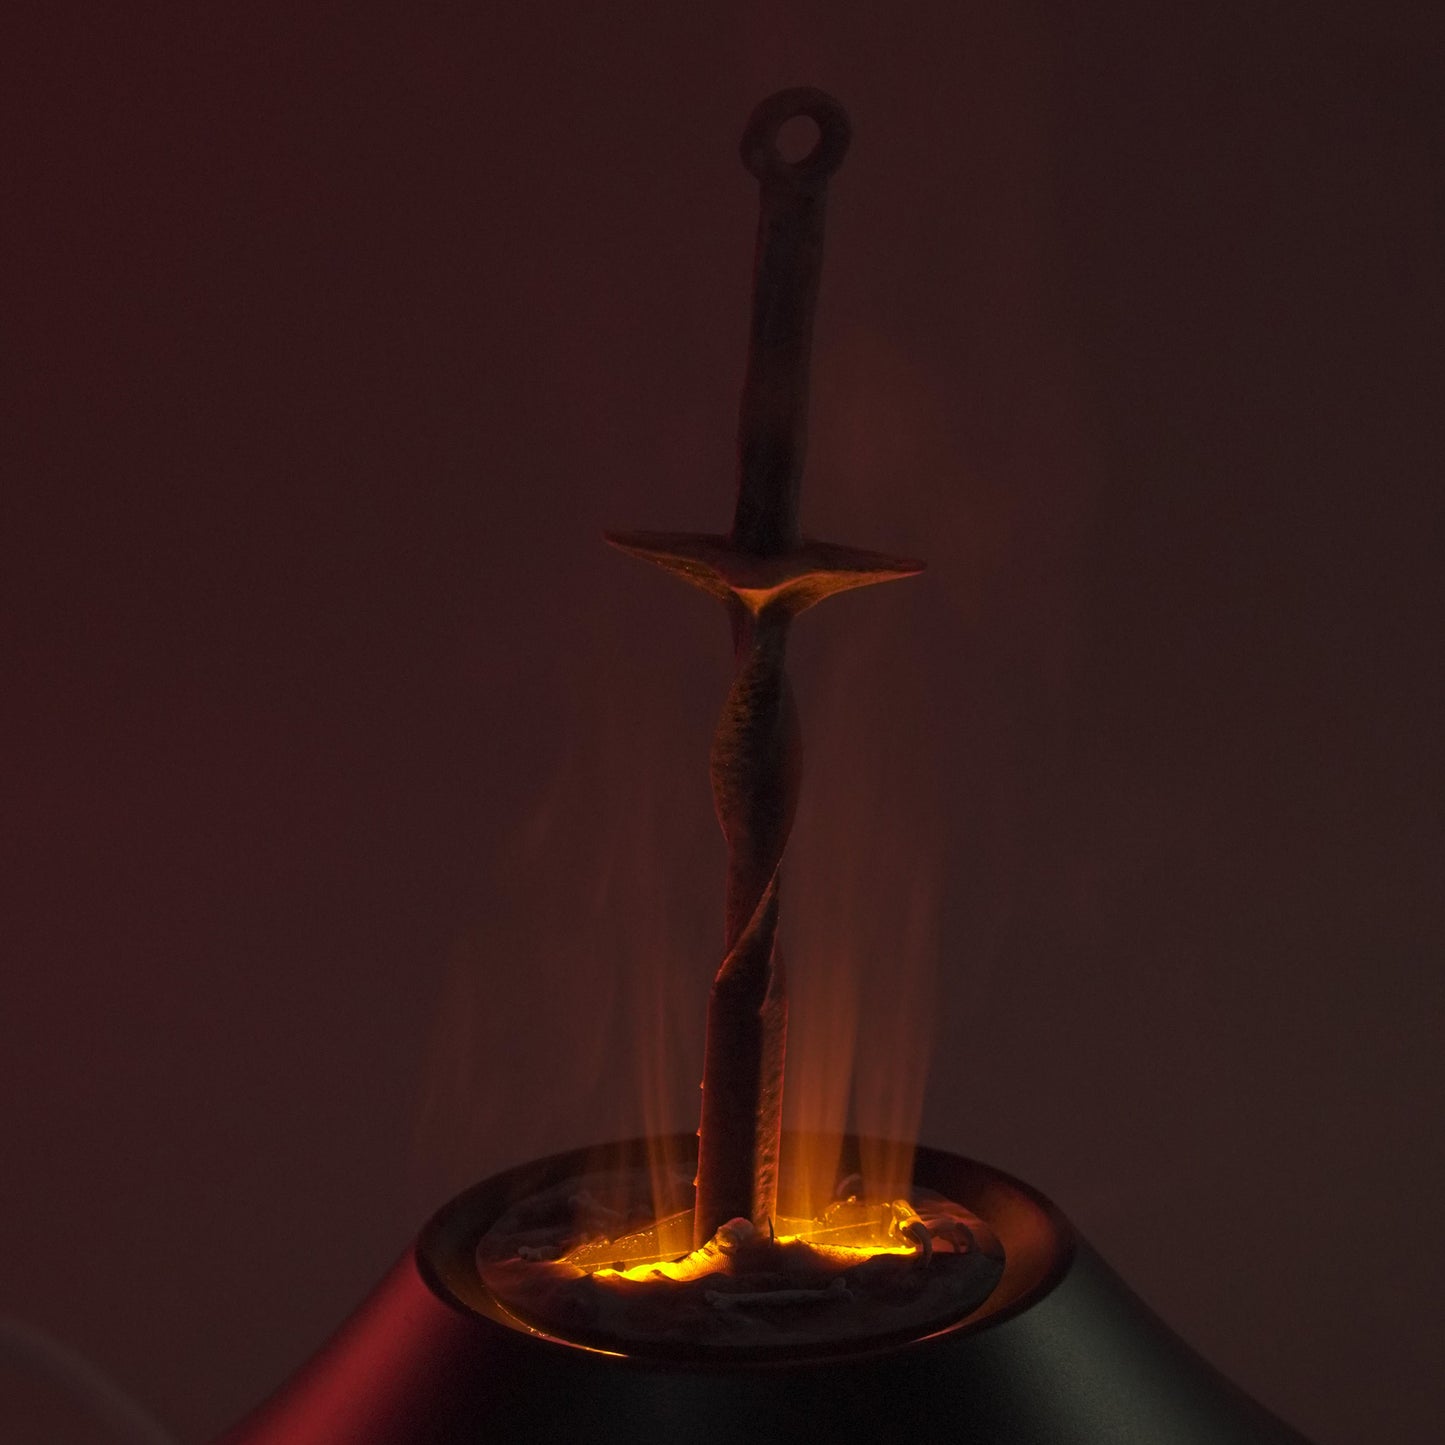 Dark Souls Coiled Sword Model, The Base has Light Effects and Humidifier Functions